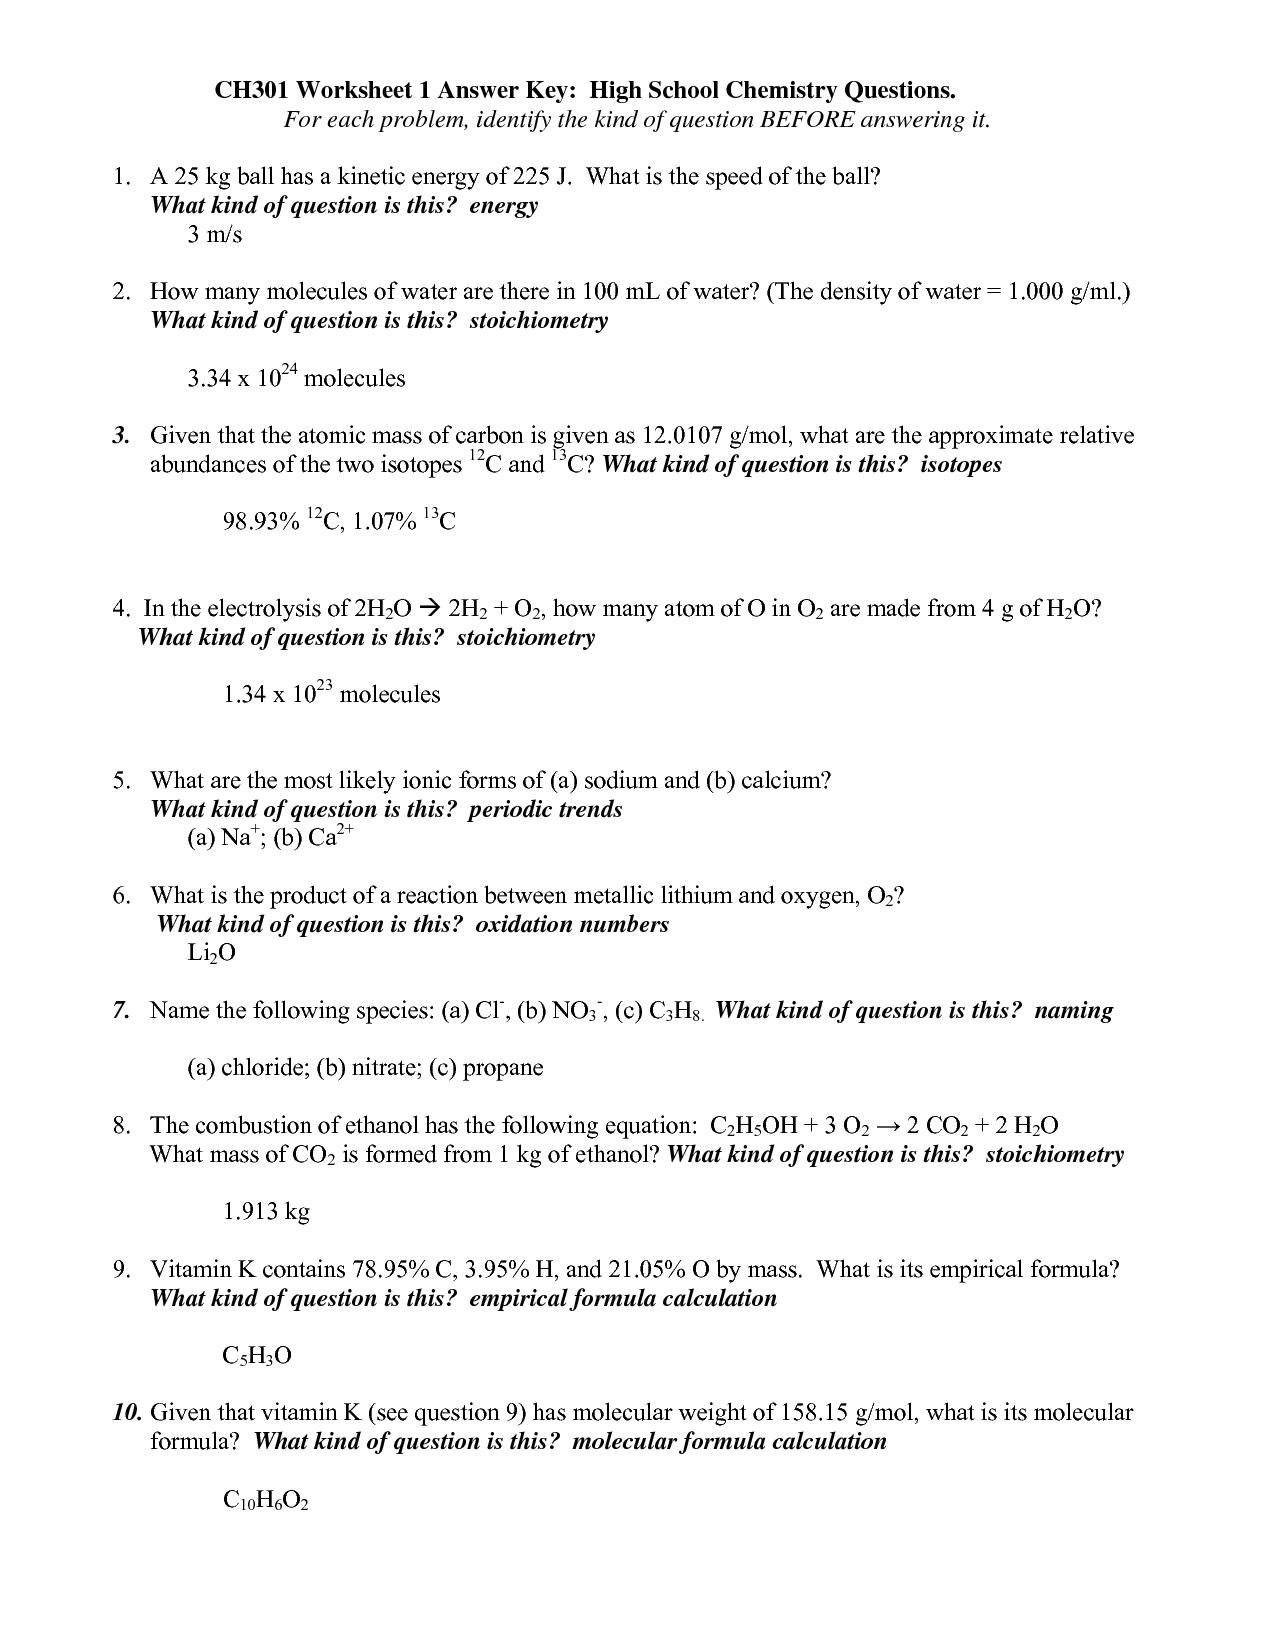 Chemistry Worksheets with Answer Key Image